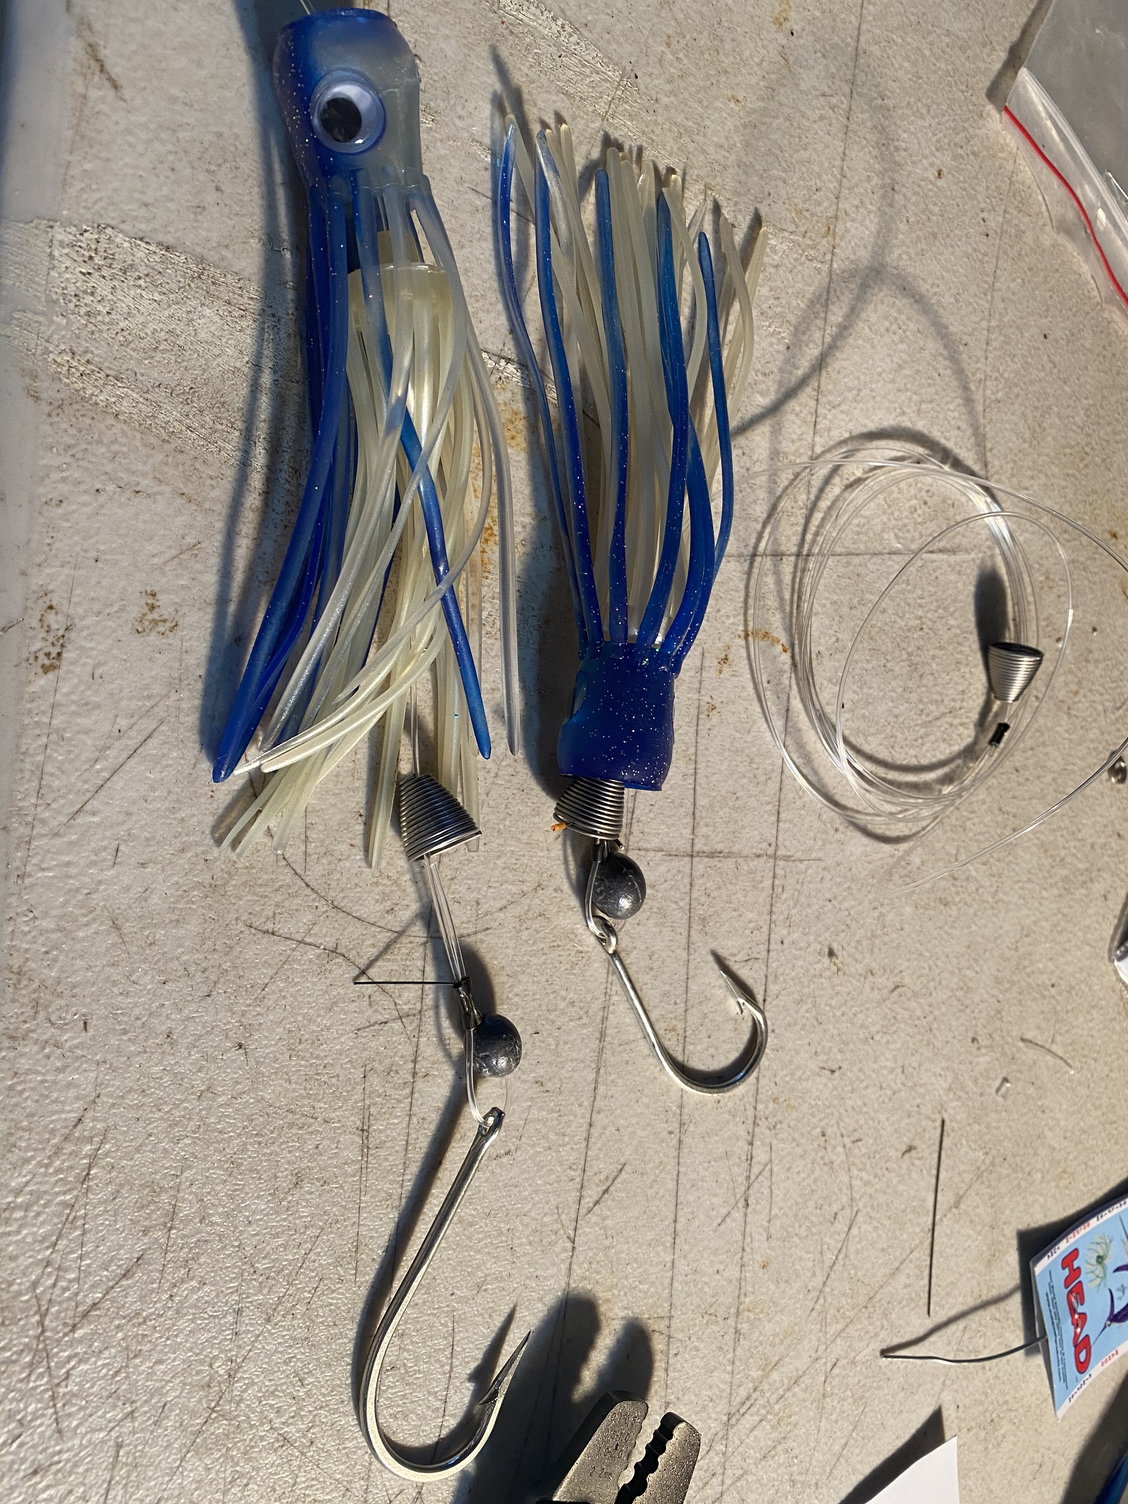 Ballyhoo Skirts rigging q - The Hull Truth - Boating and Fishing Forum